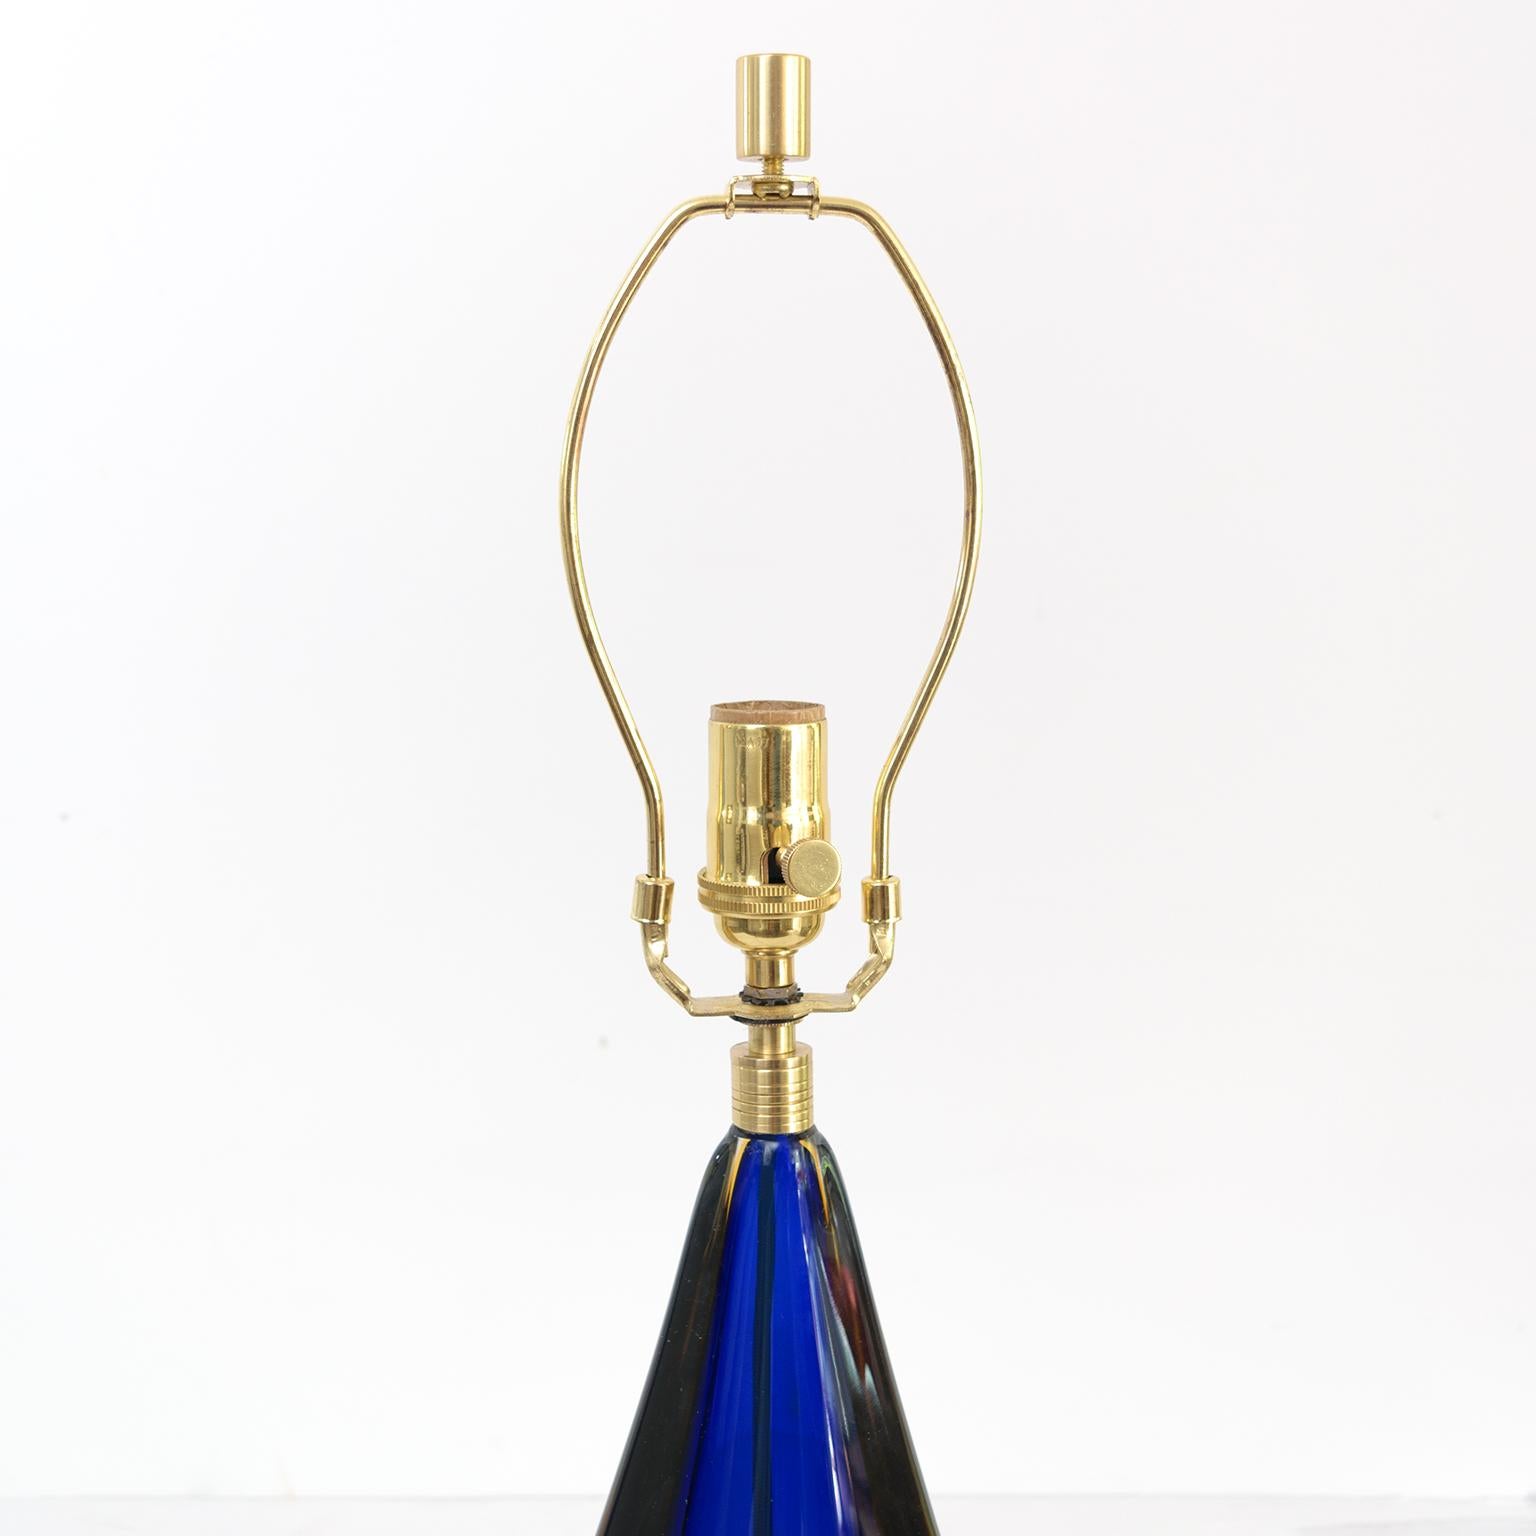 Hand-Crafted Valentino, Murano Italy Multicolored Glass Sommerso Technique Table Lamp